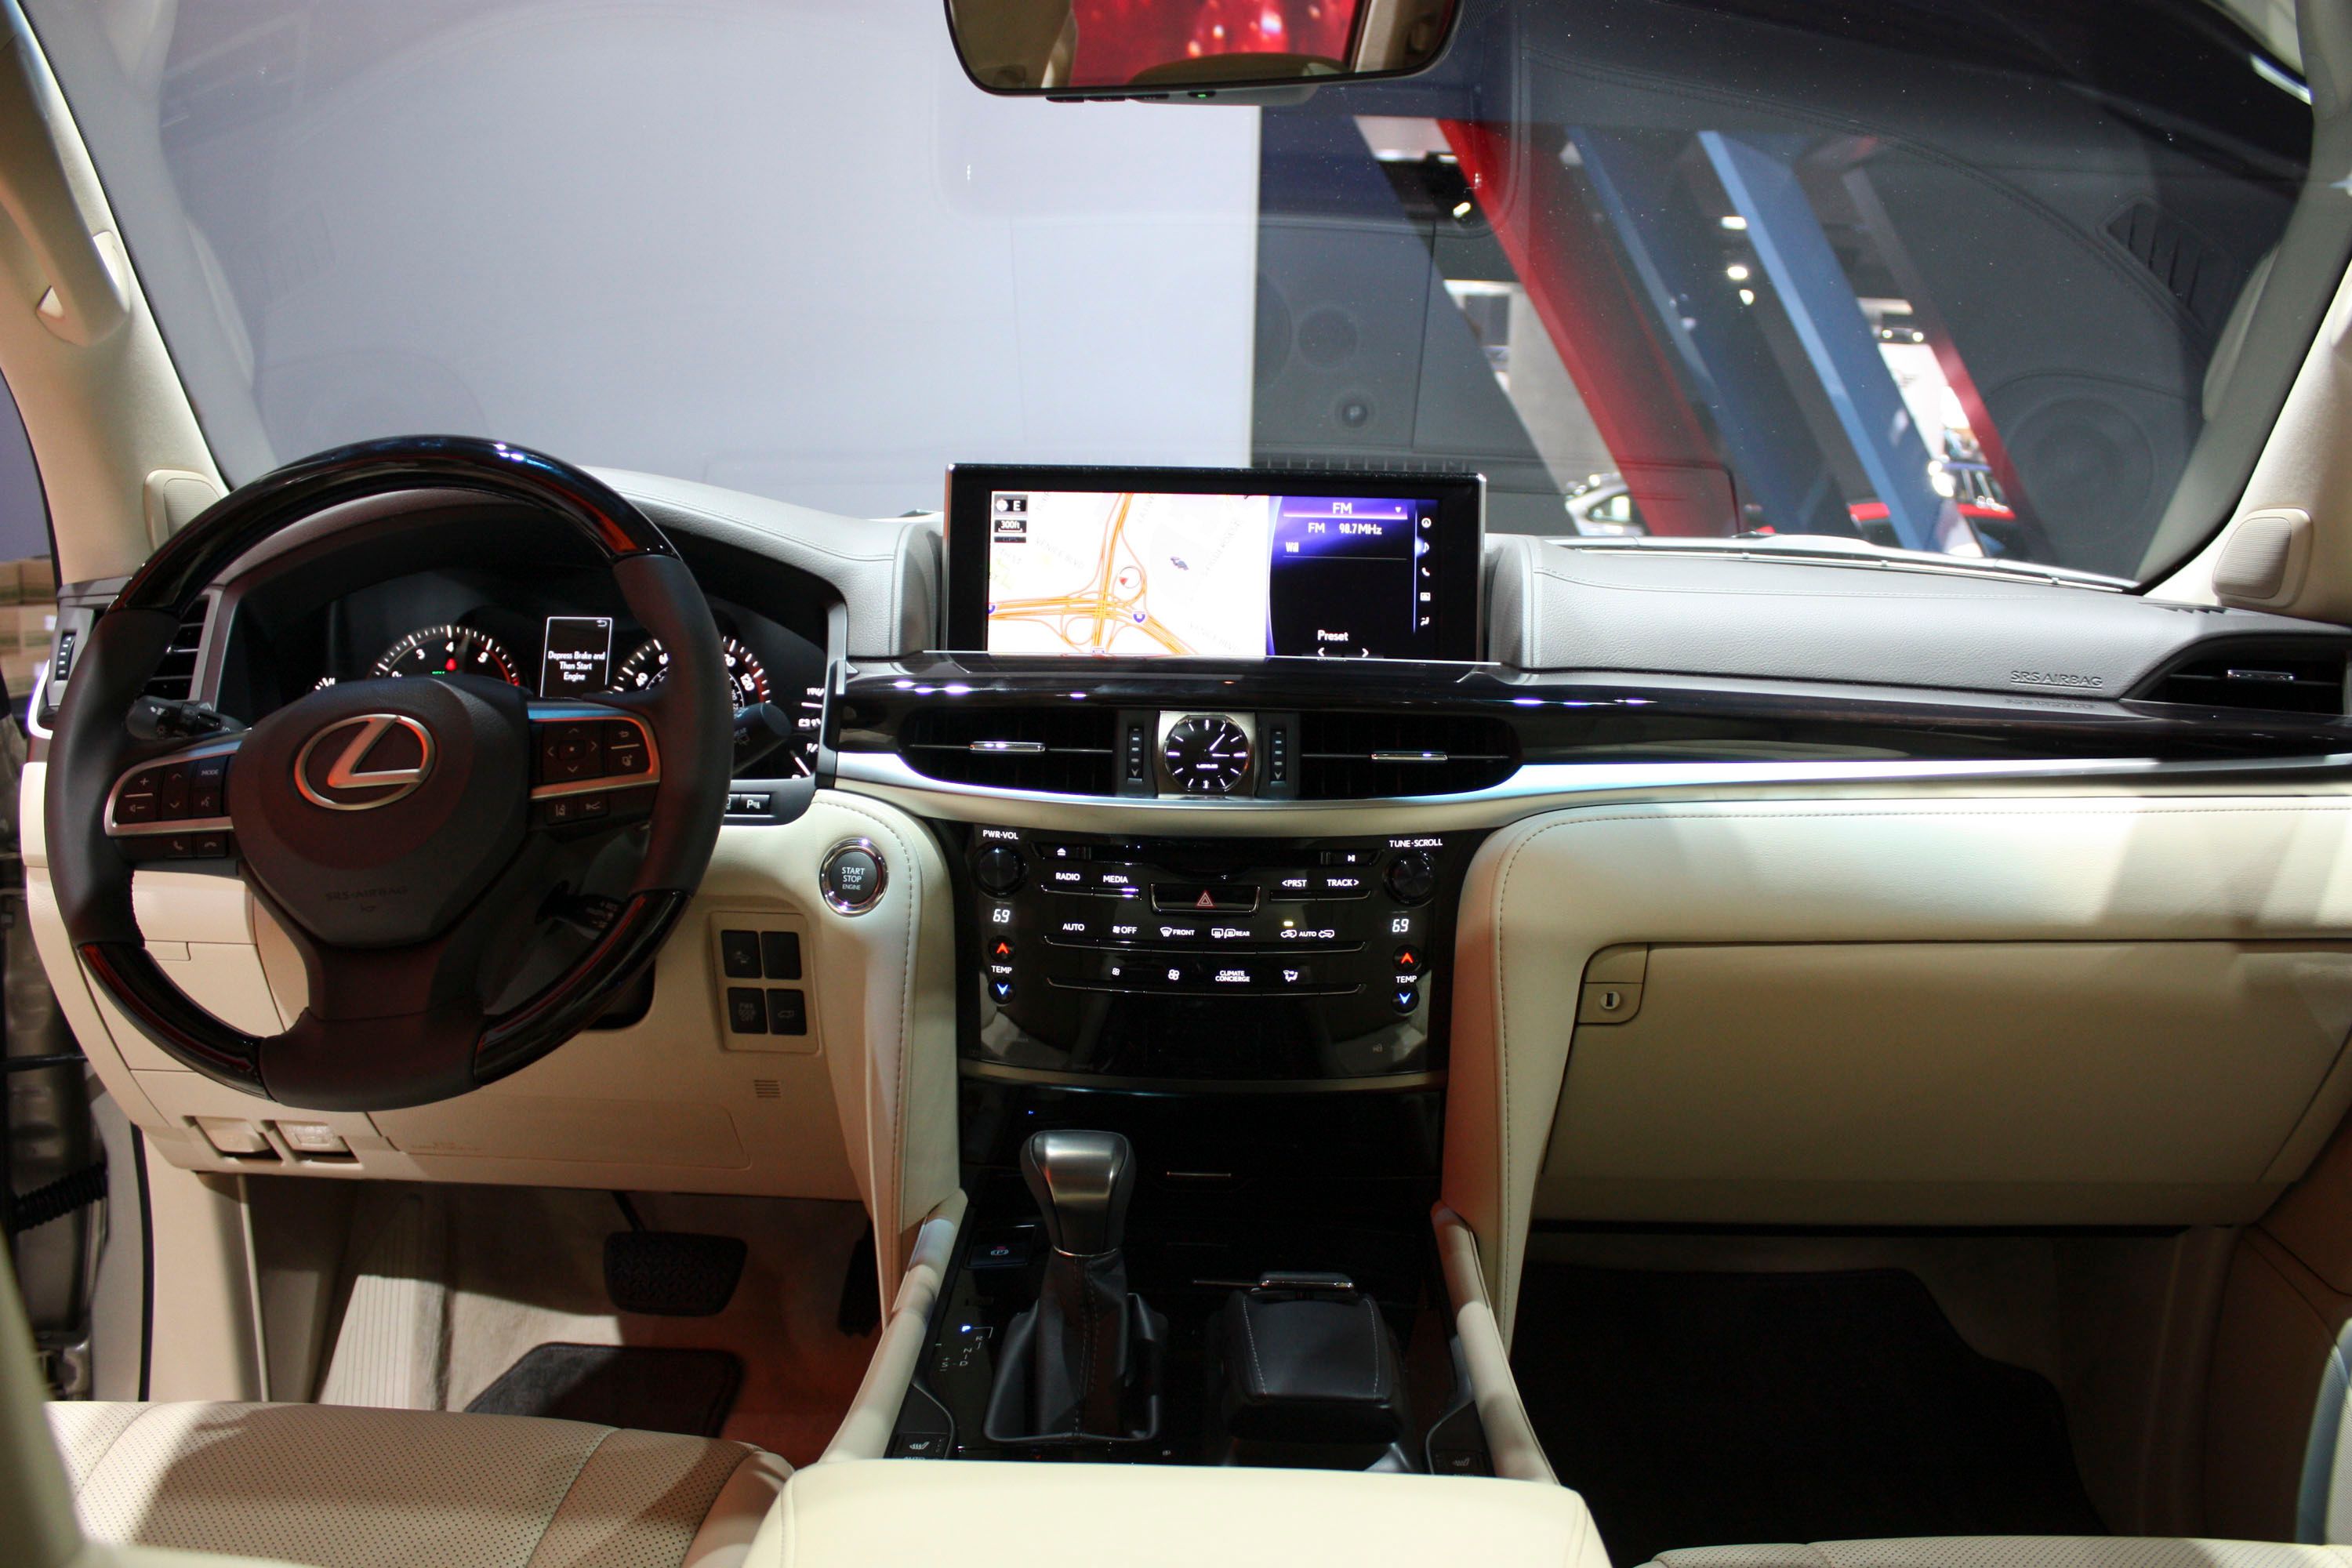 3-inch screen for infotainment